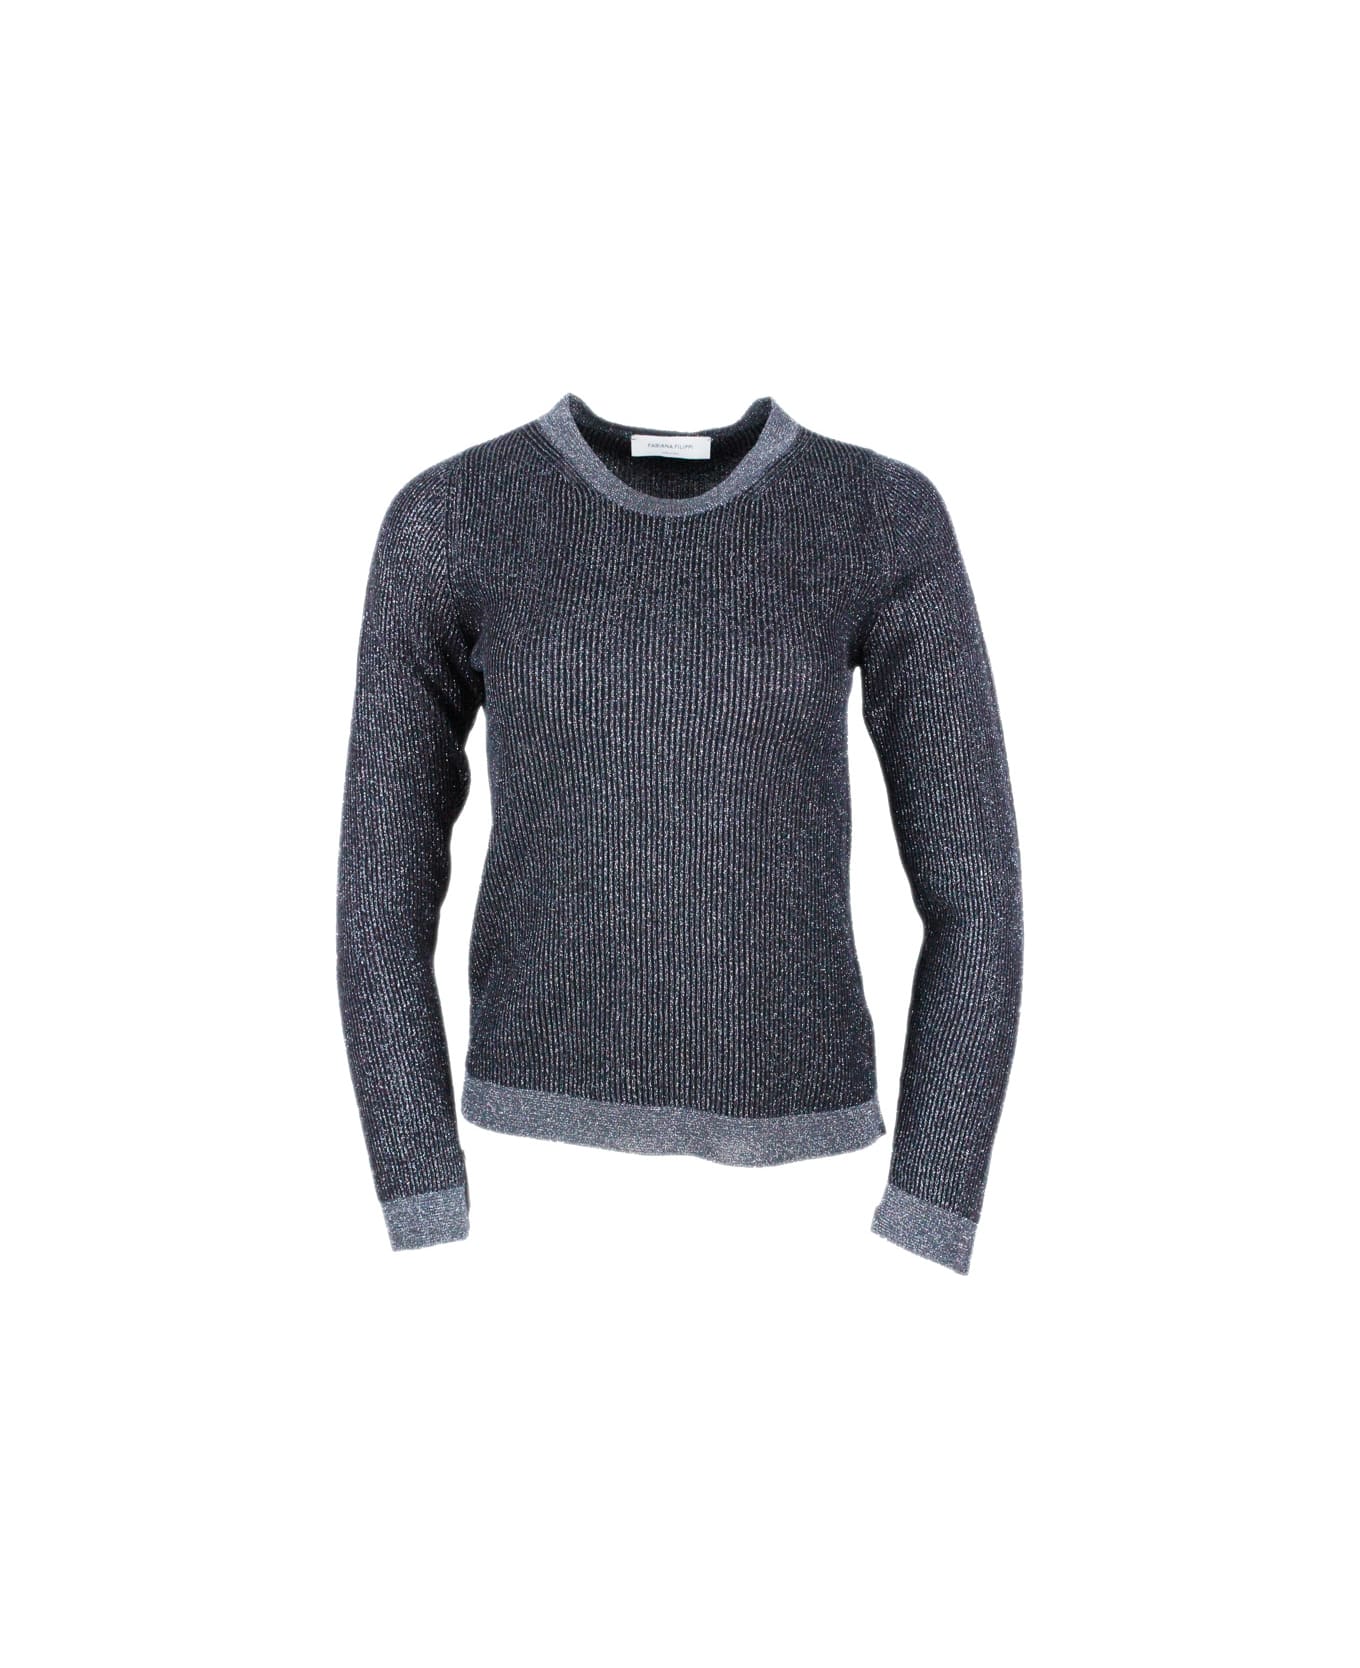 Fabiana Filippi Long-sleeved Crew-neck Sweater In Organic Cotton And Lurex With Ribbed Knit - Blu